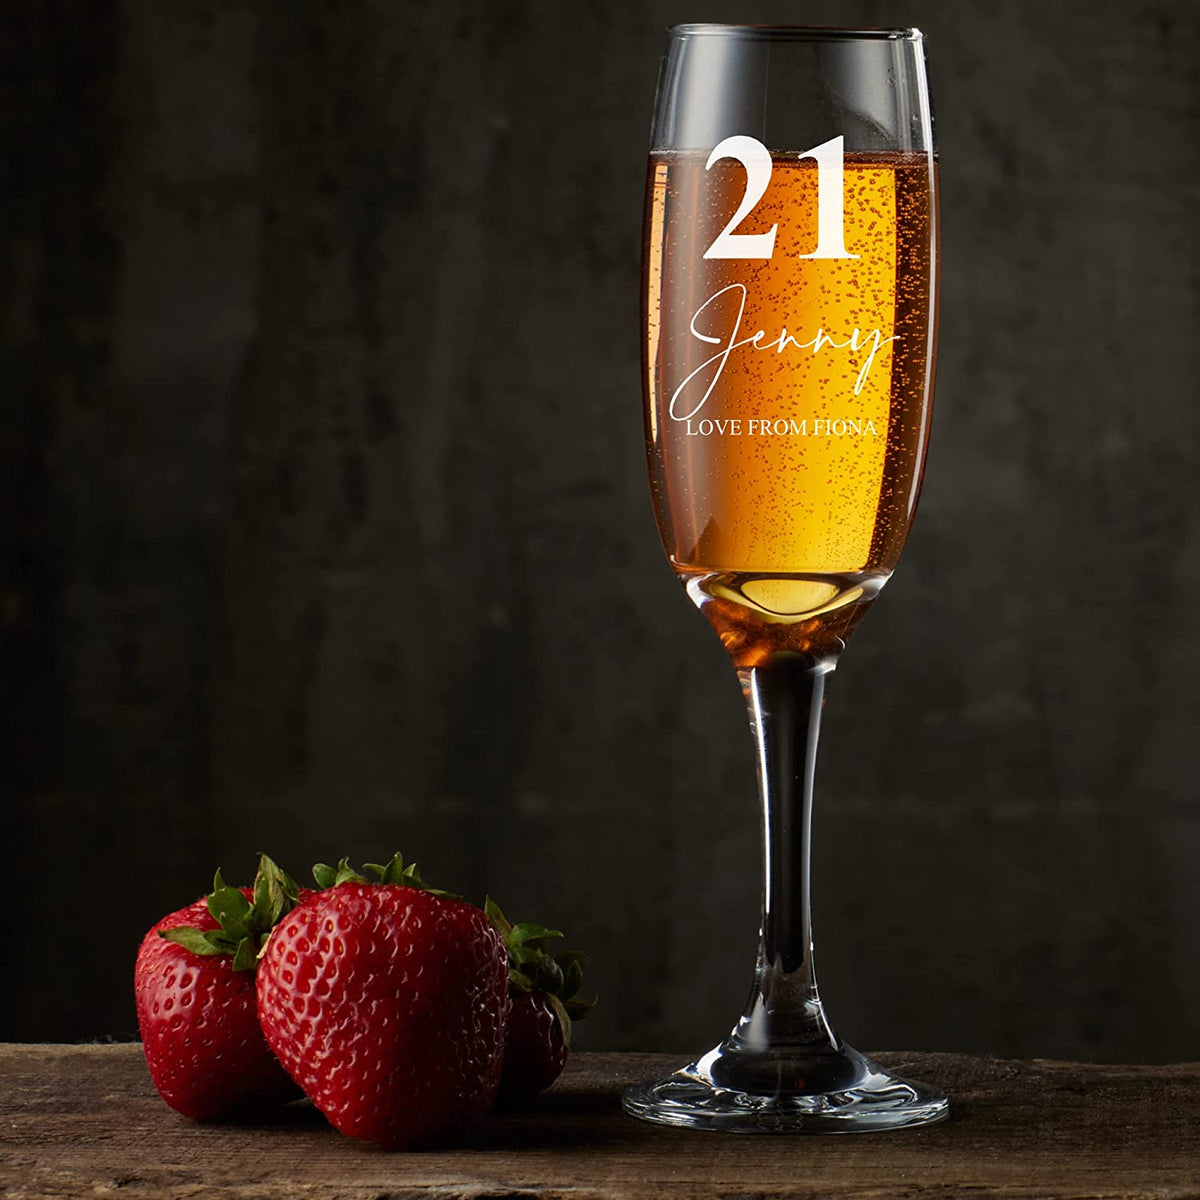 Personalised 21st Birthday Signature Champagne Flute Prosecco Glass Gift